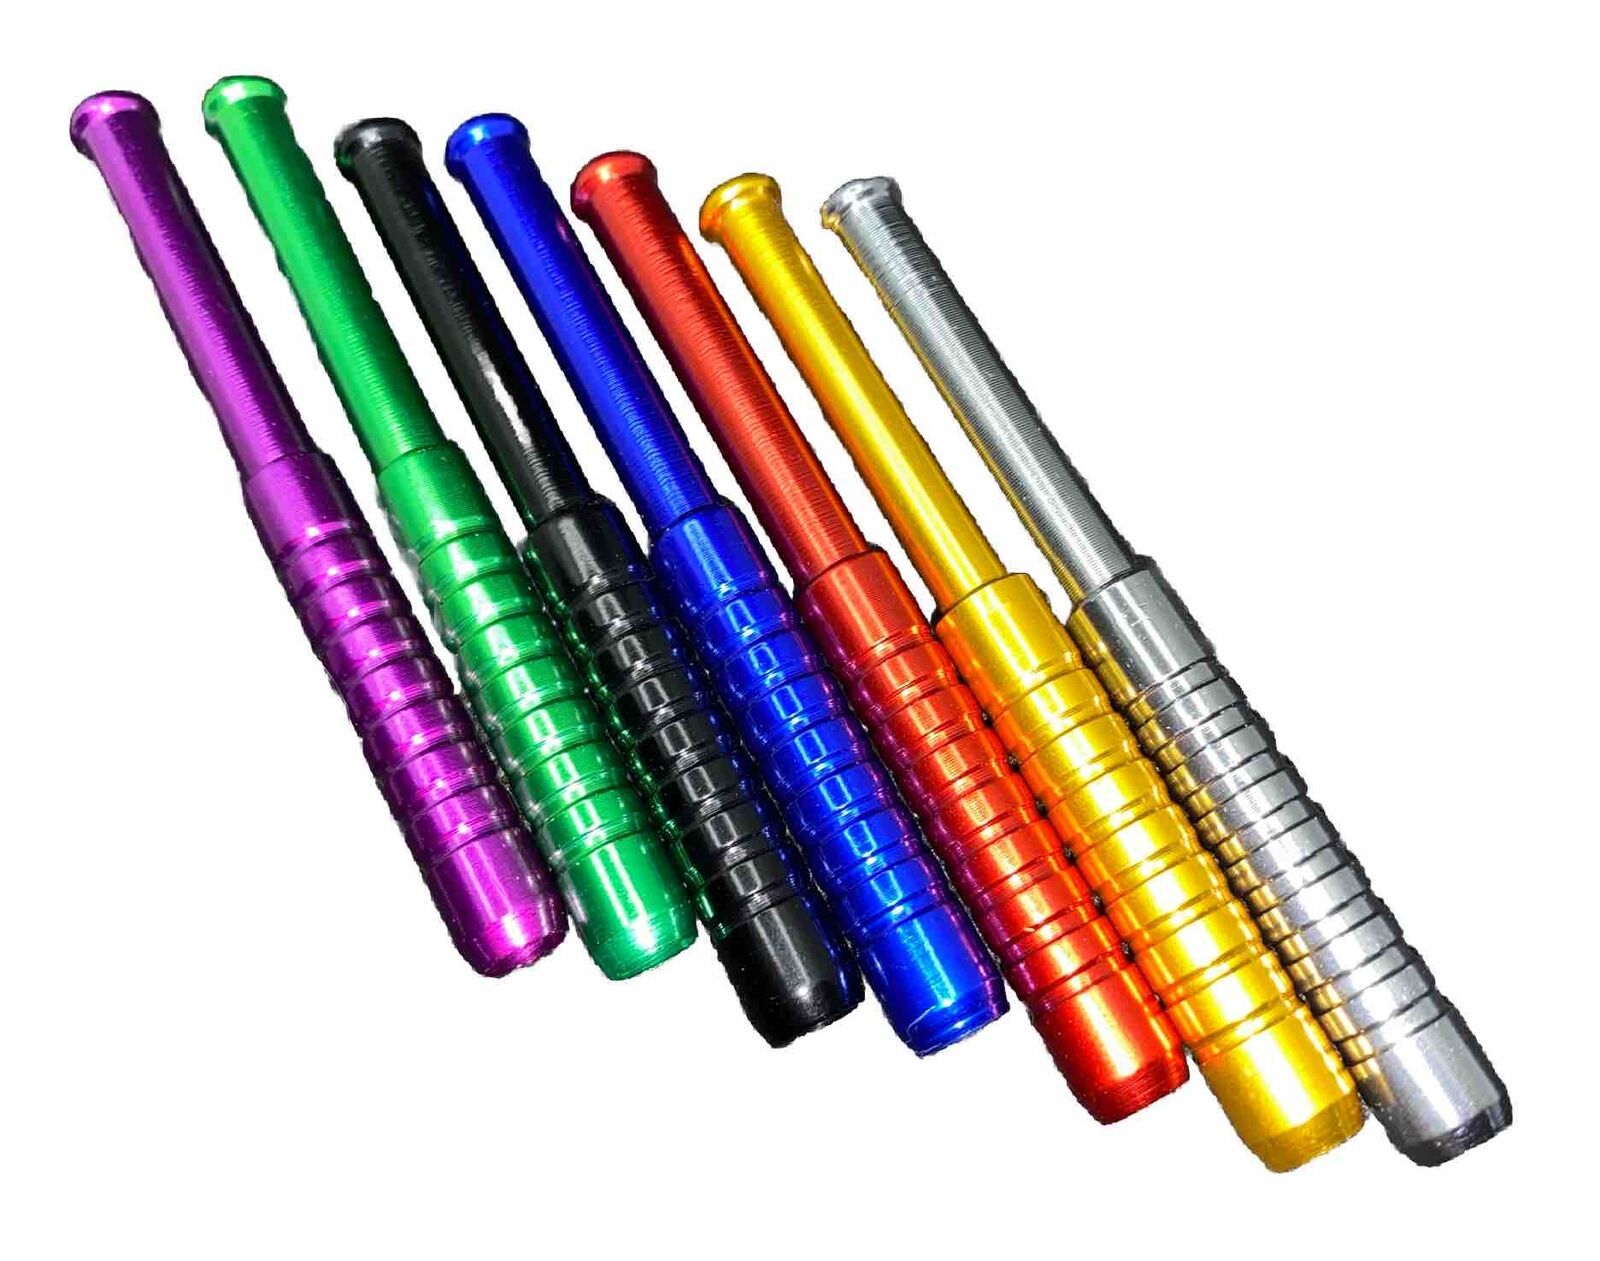 LOT OF 7 SOLID ANODIZED ALUMINUM ONE HITTER PIPE DUGOUT BAT 3 INCH SALE PRICED